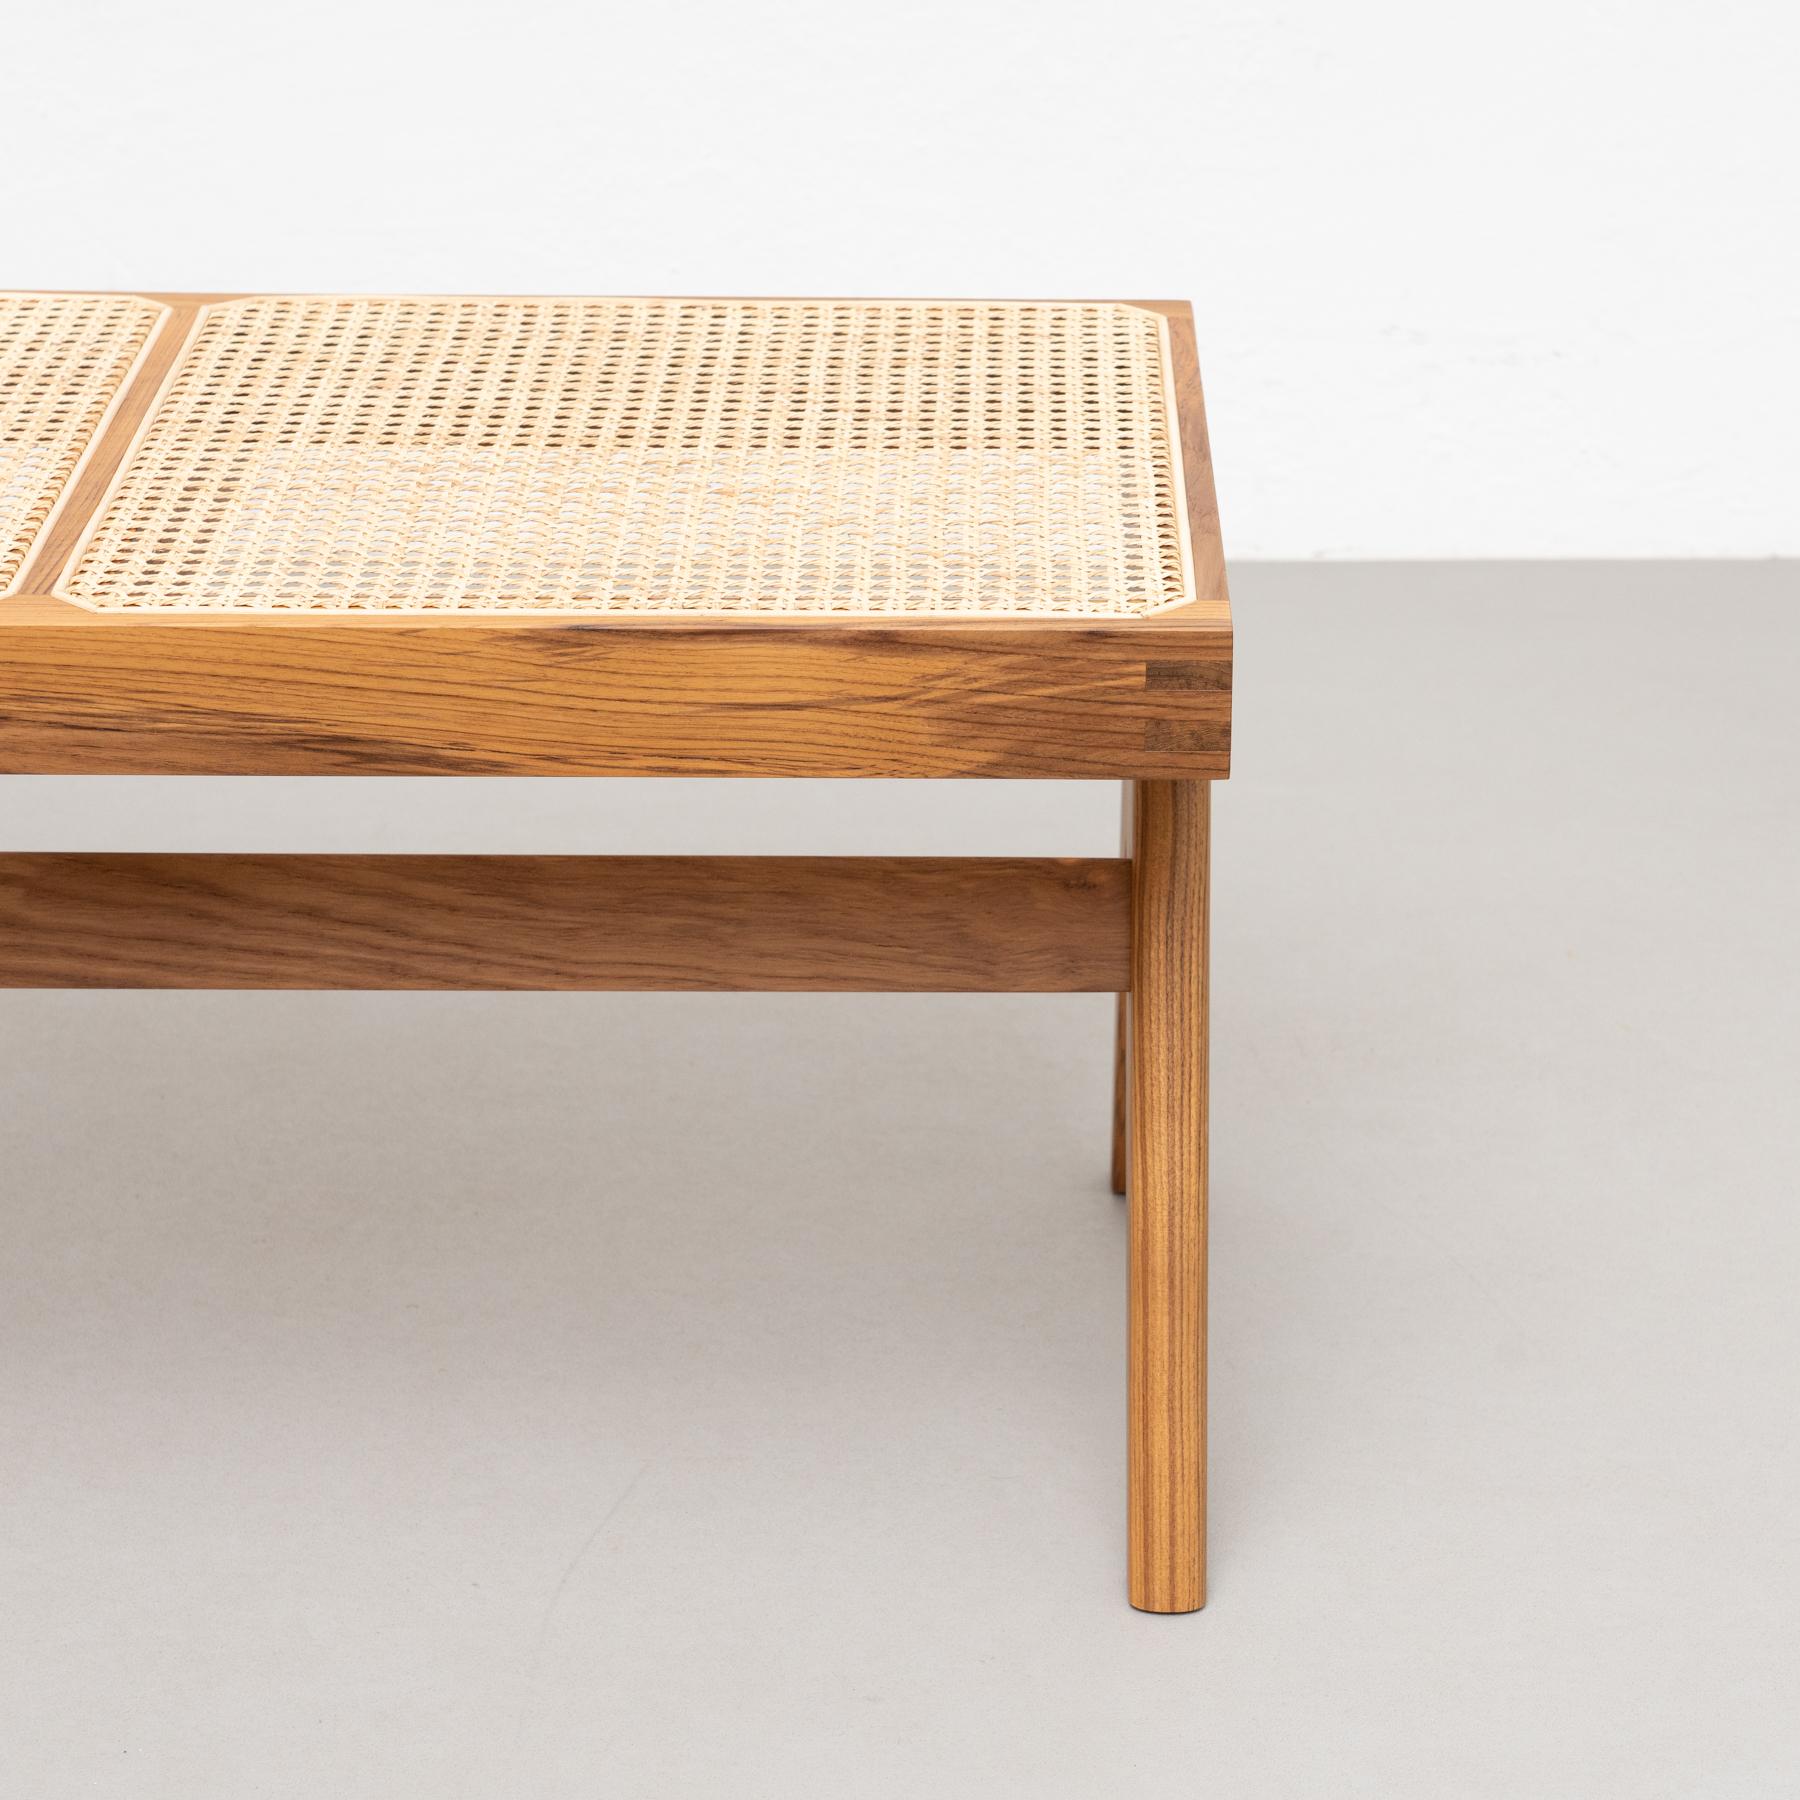 Pierre Jeanneret 057 Civil Bench, Wood and Woven Viennese Cane For Sale 4